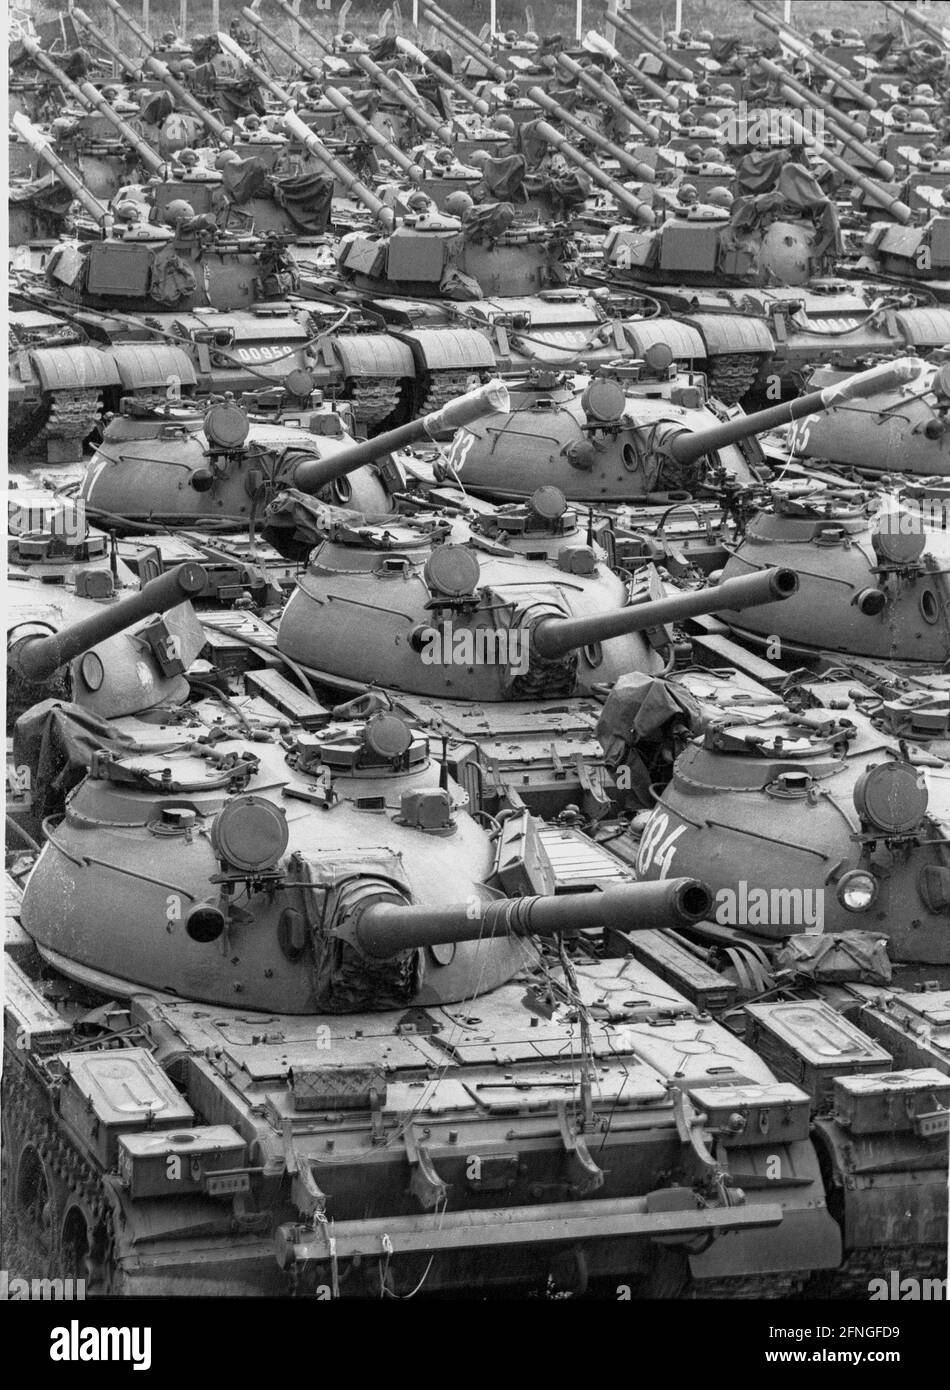 Saxony / GDR State / Unification / 1990 GDR tanks of the type T55 are waiting to be scrapped, grounds of the People's Army in Loebau. The People's Army is disbanded, most of the weapons are destroyed or sold abroad // Militaer / Waffen / Bundeslaender / Militaer / / DDR-Staat *** Local Caption *** East Germany / Communist Germany End of the Cold War. In Saxony tanks of the East German Army are scapped according to agreements with Soviet Union and the Western Allies. [automated translation] Stock Photo